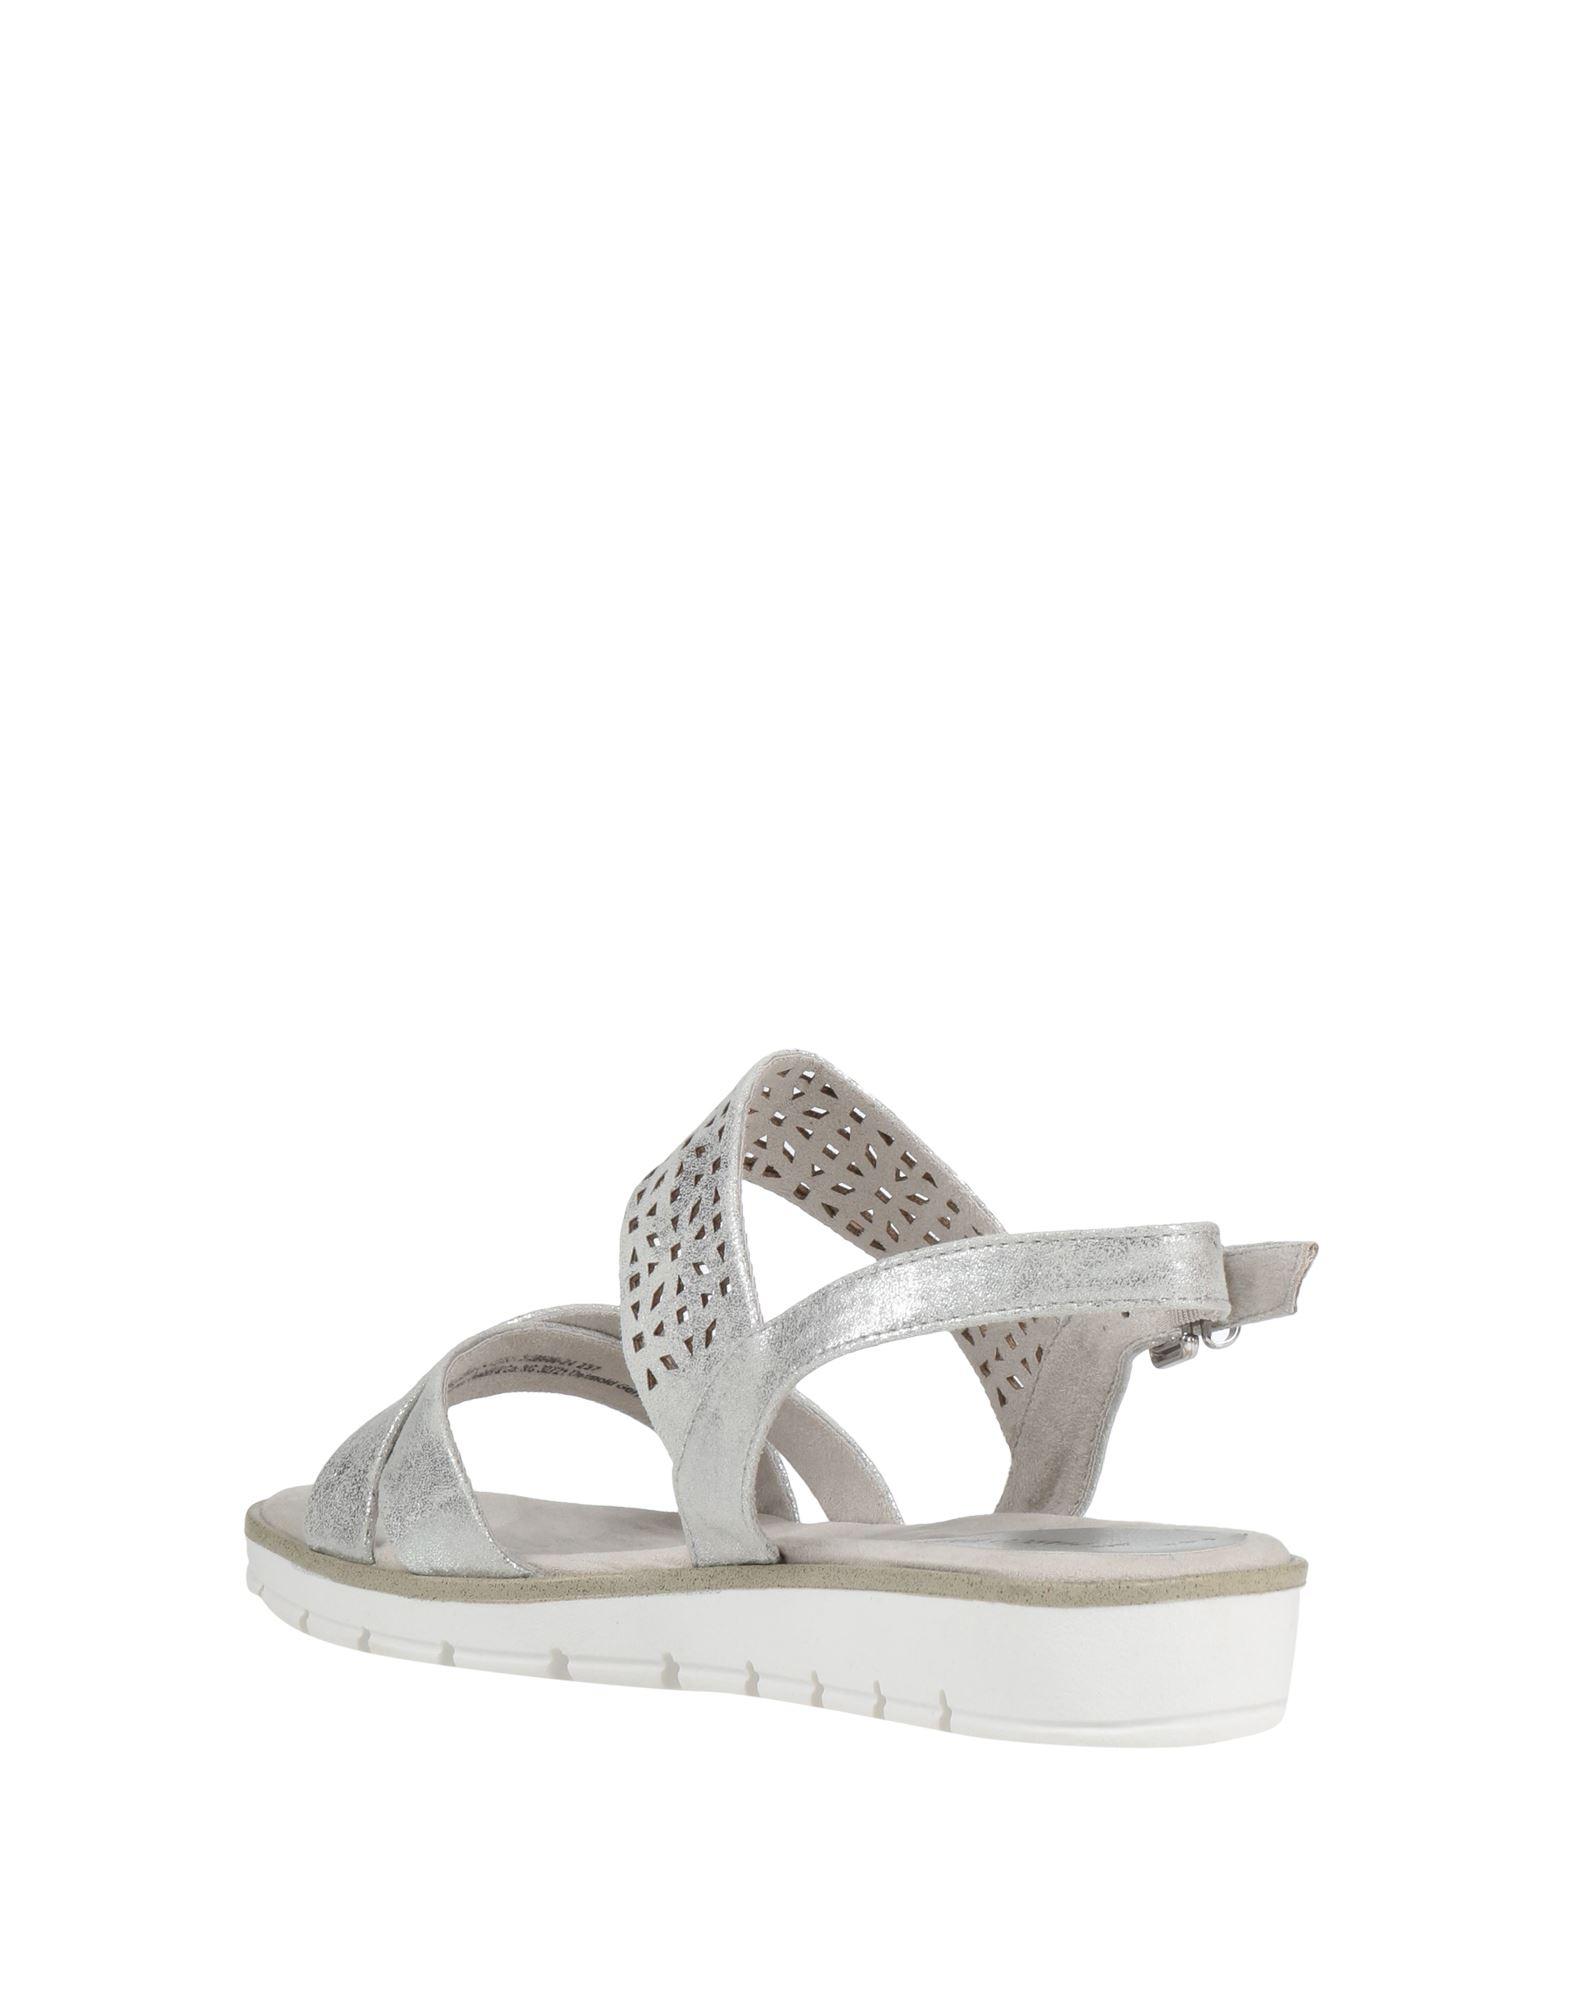 Marco Tozzi Sandals in Lyst